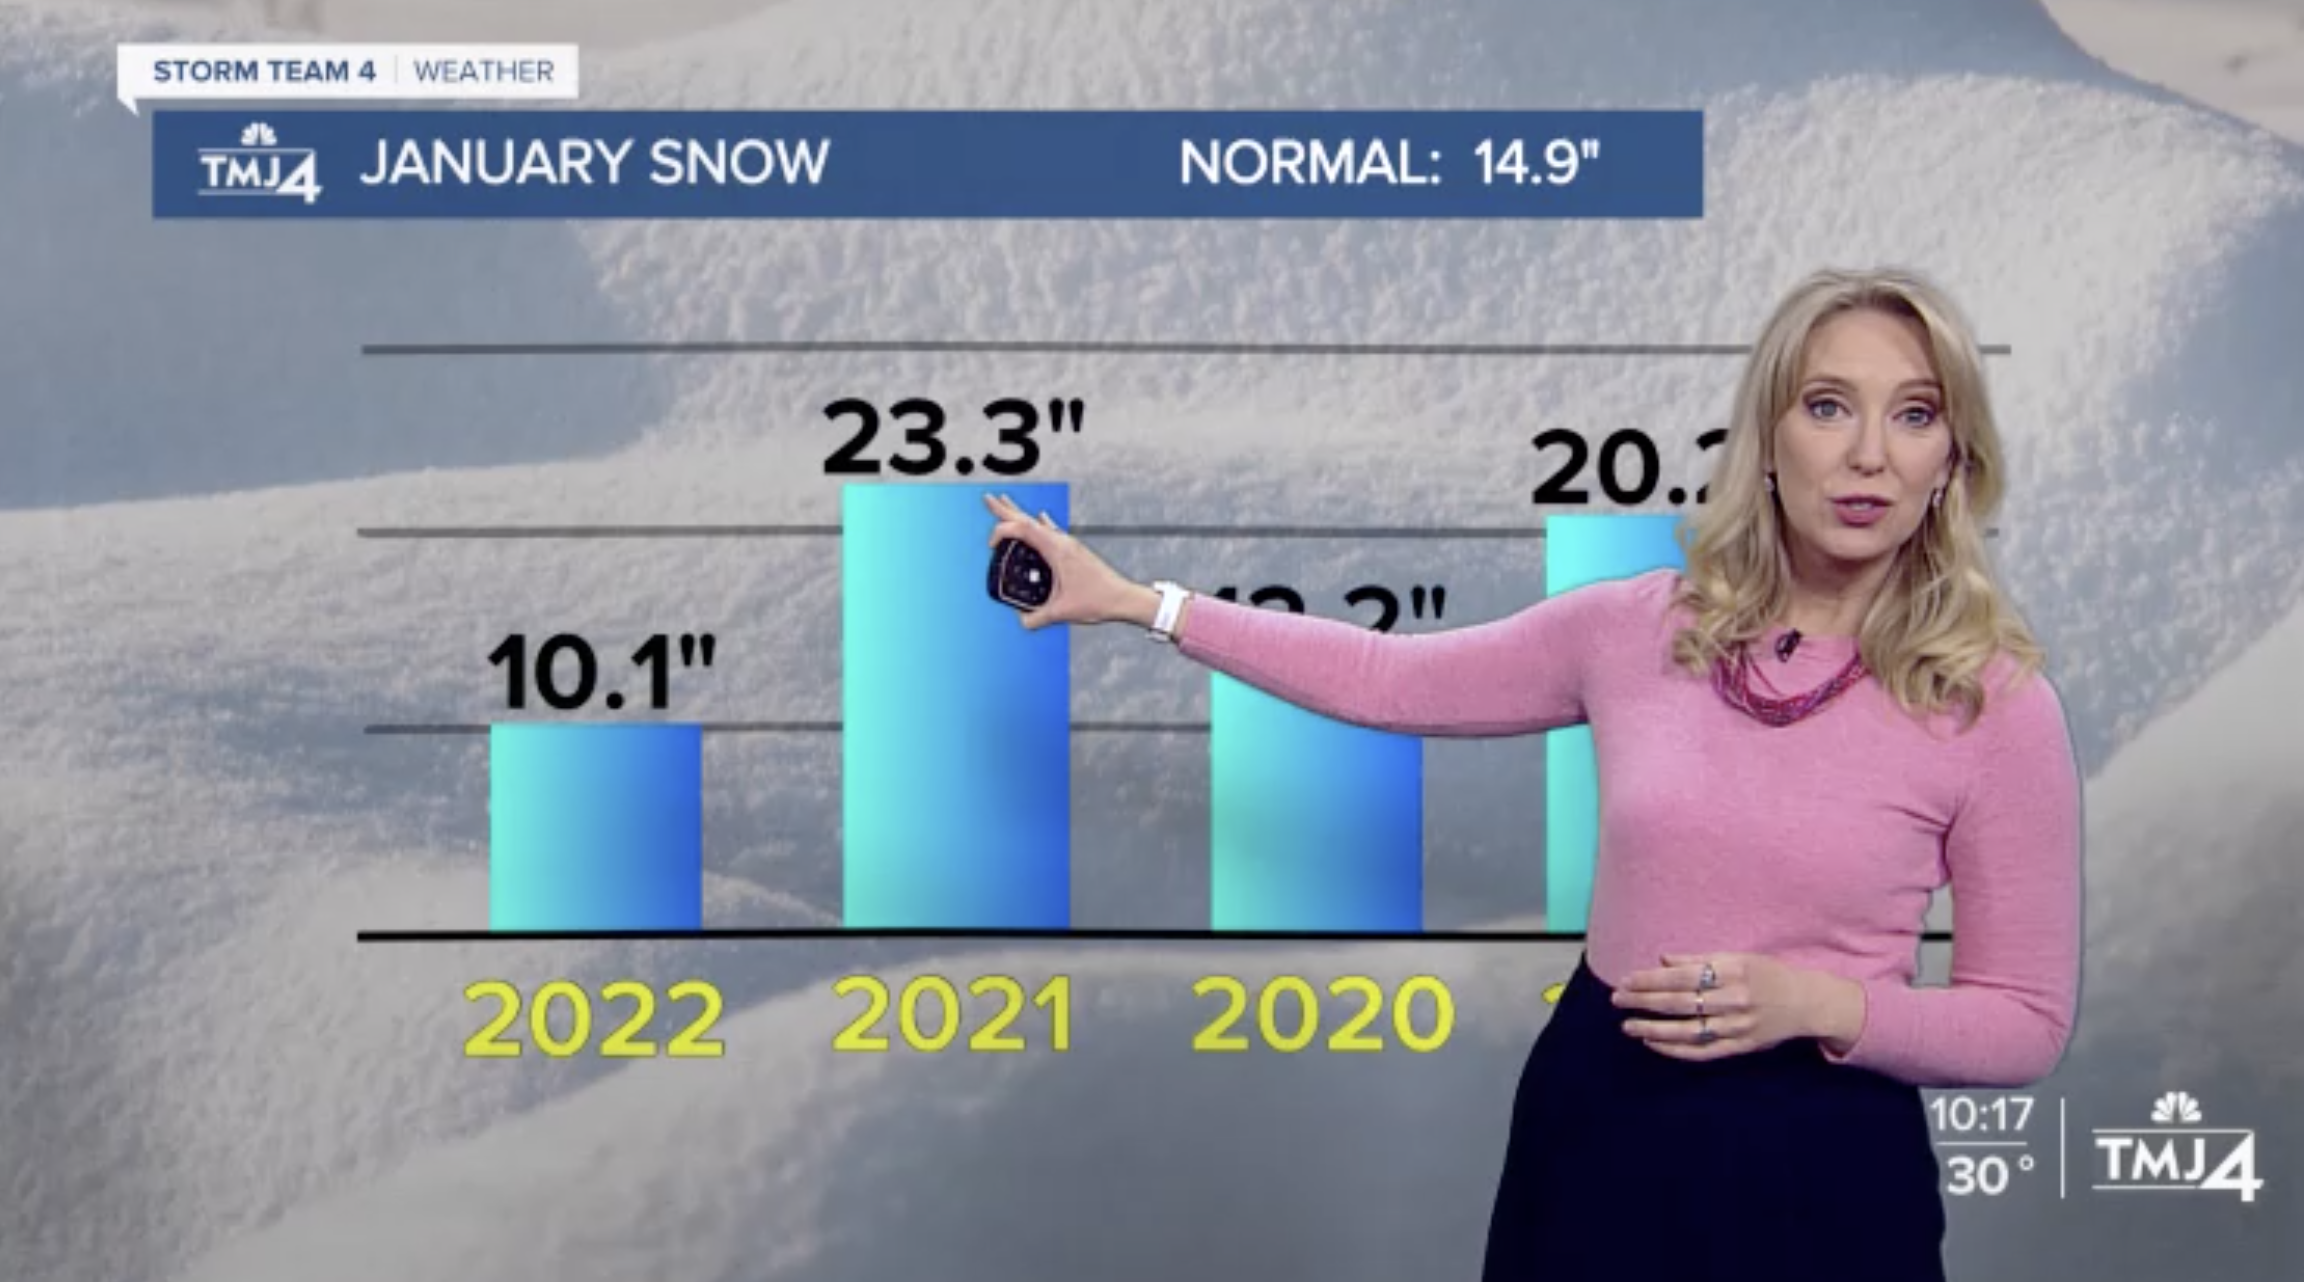 A broadcast meteorologist shows a graphic of snow fall levels during a show